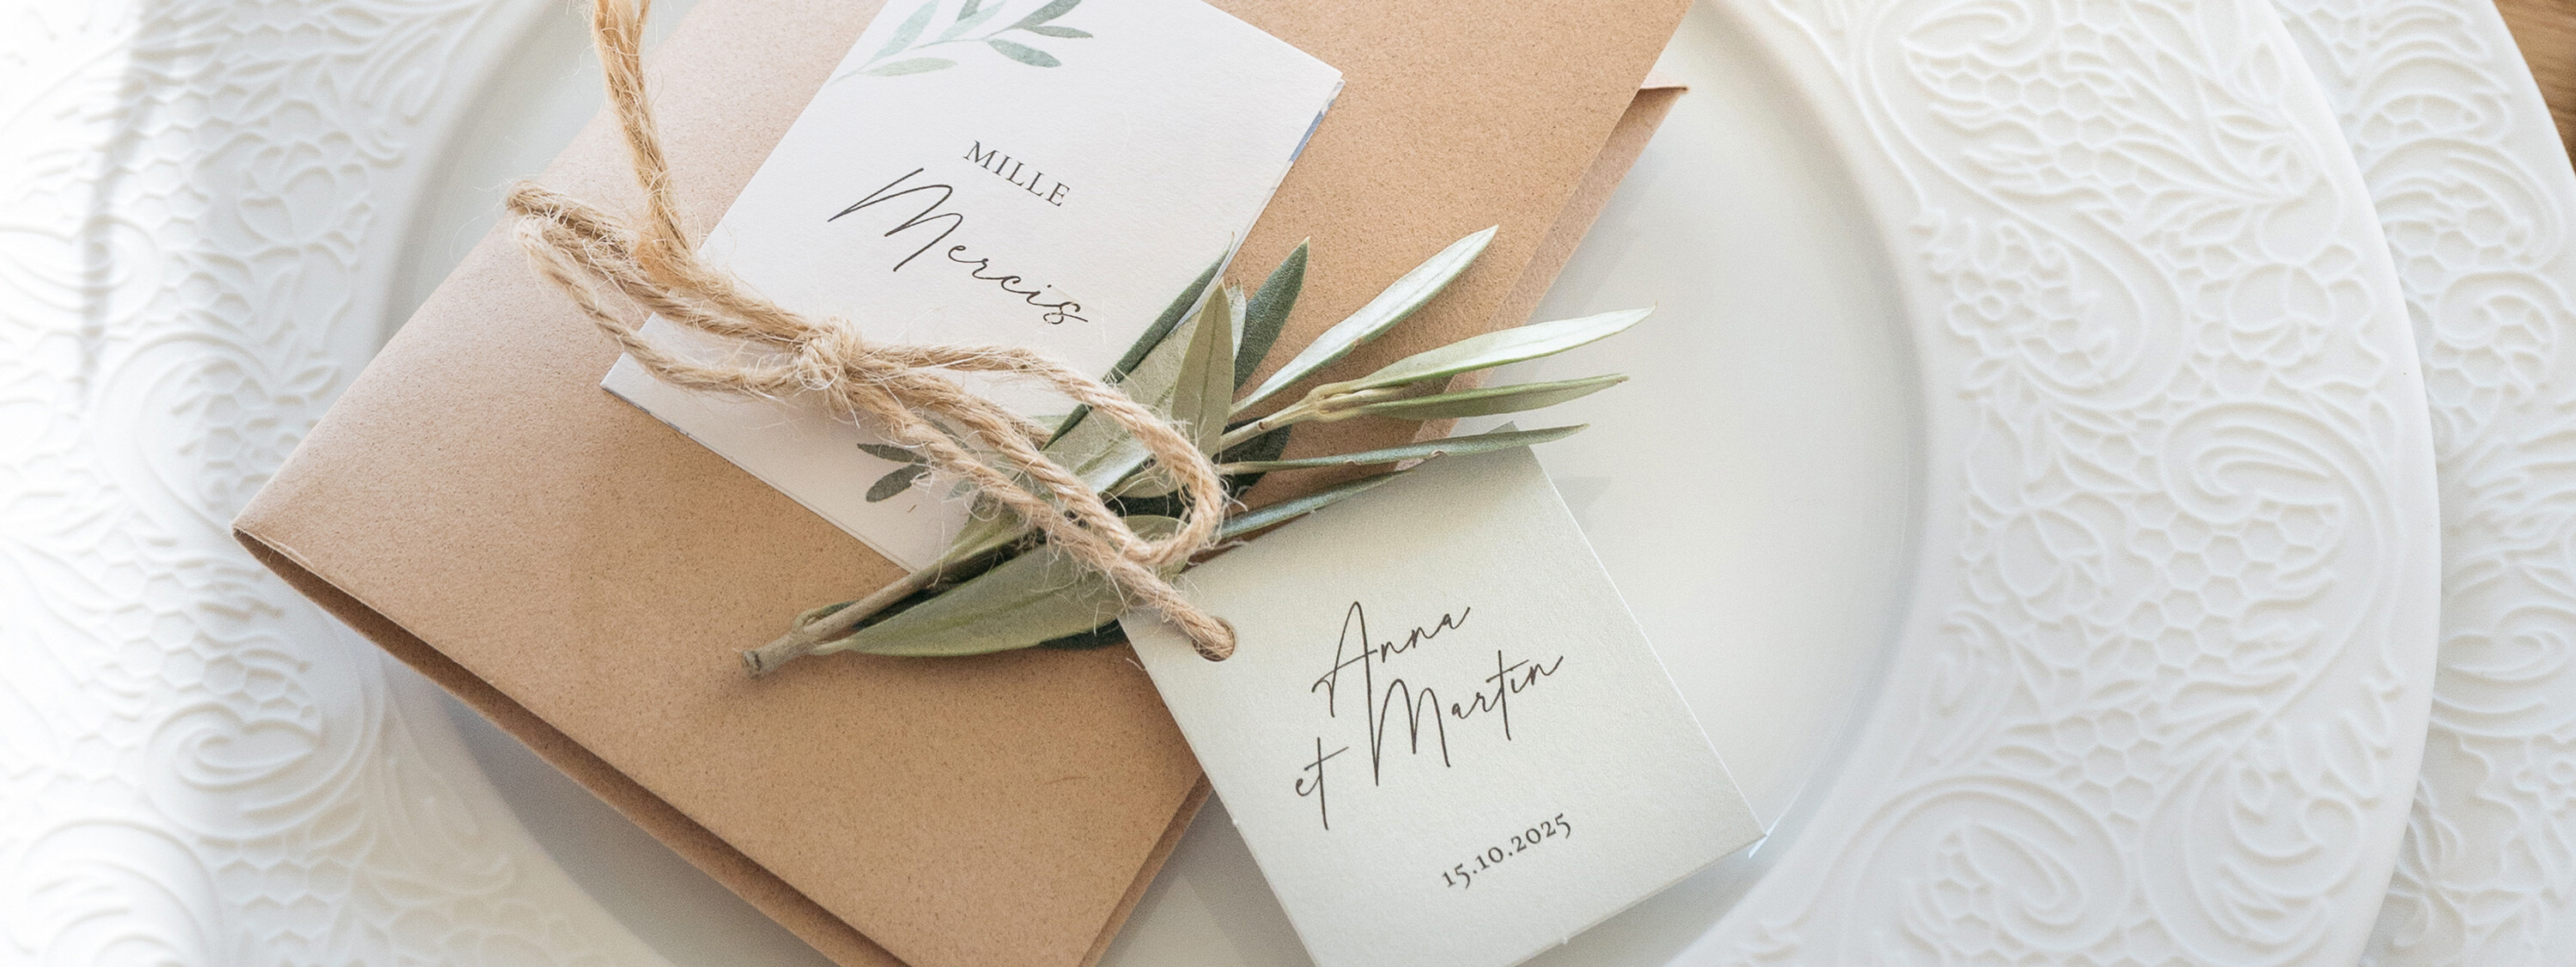 Wedding Gift Tags from Marguerite Courtieu